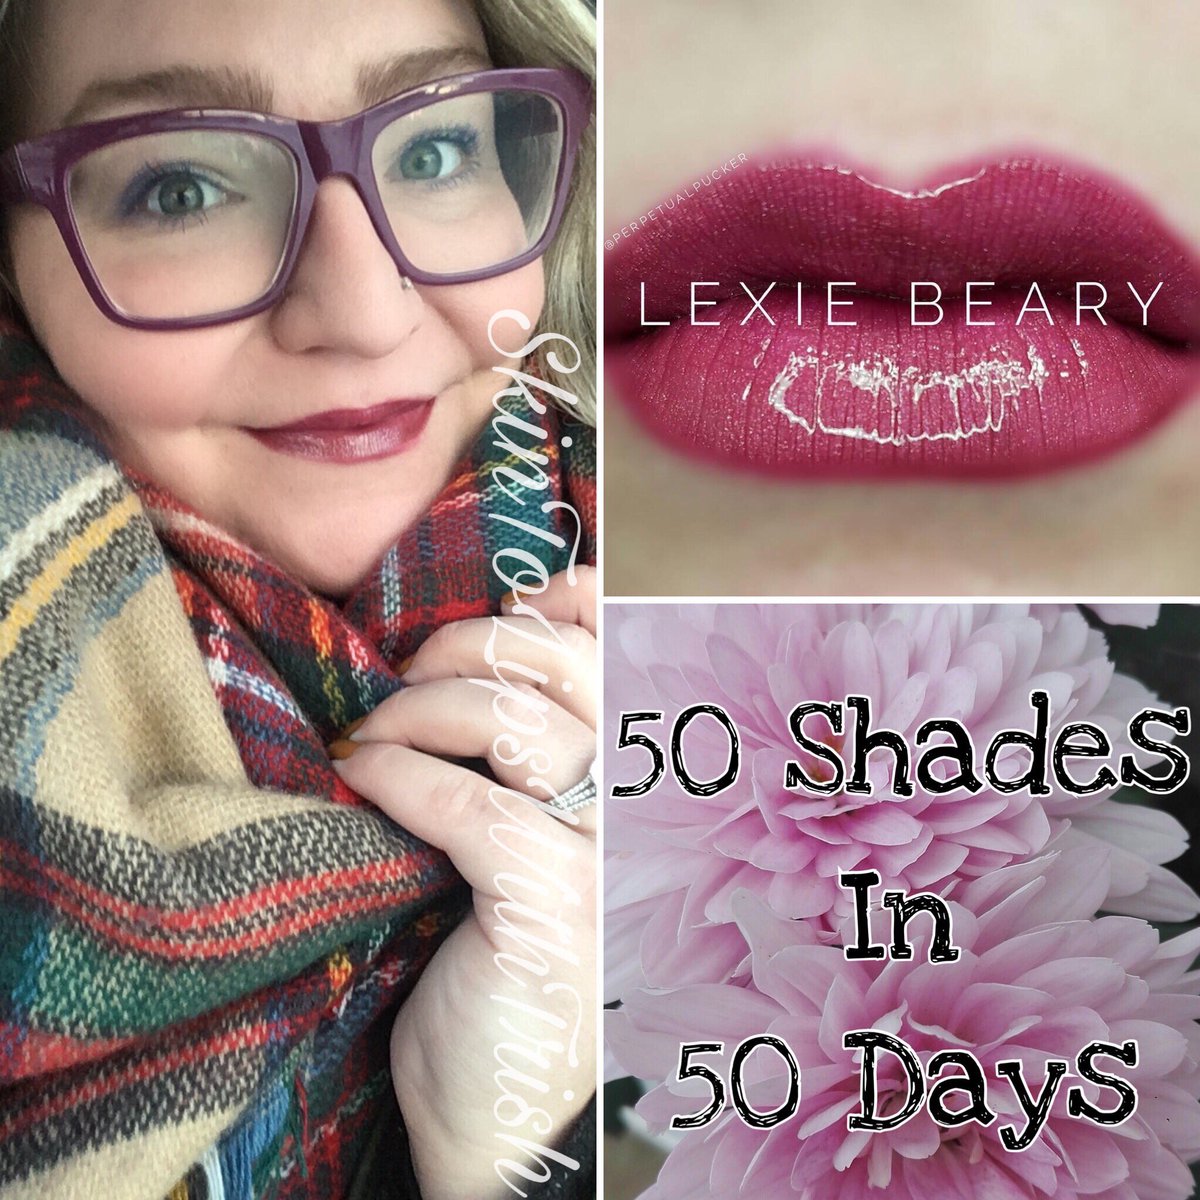 Day 43 🌟 #50ShadesIn50Days
Today is Lexie Bear-y!!! 10% OFF and FREE SHIPPING for today!
.
.
.
.
.
#SkinToLipsWithTrish #STLWT #LexieBeary #SeneGence #LipSense